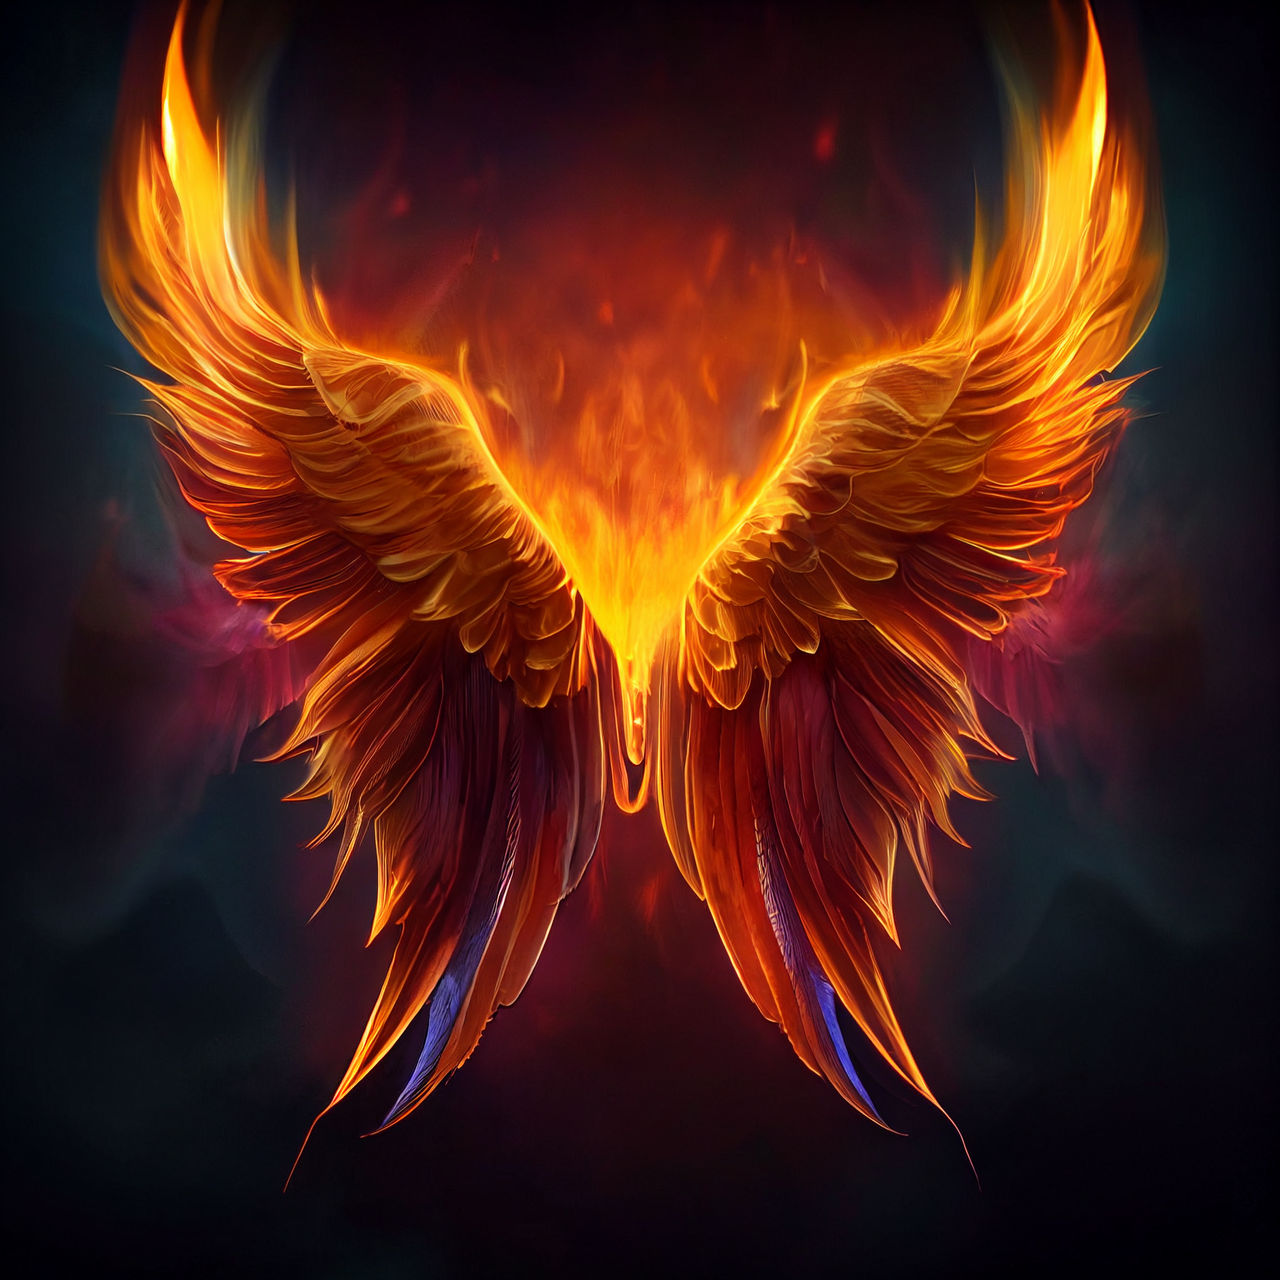 Flaming angel wings version 1 by PM-Artistic on DeviantArt